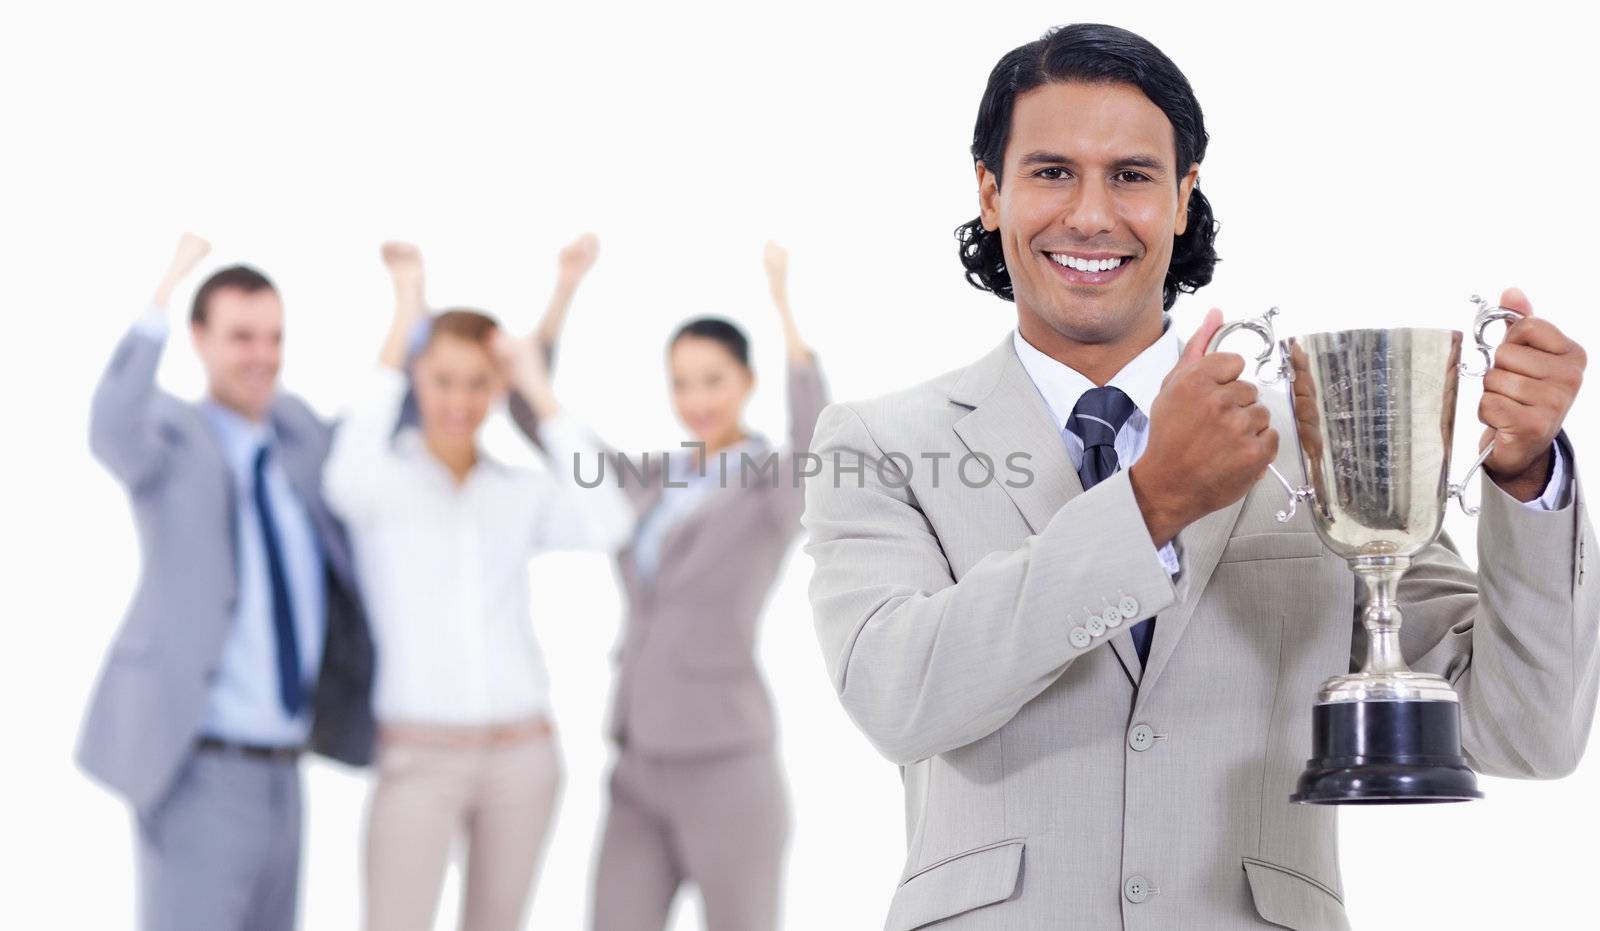 Close-up of a businessman smiling and holding a cup with people cheering behind him against white background